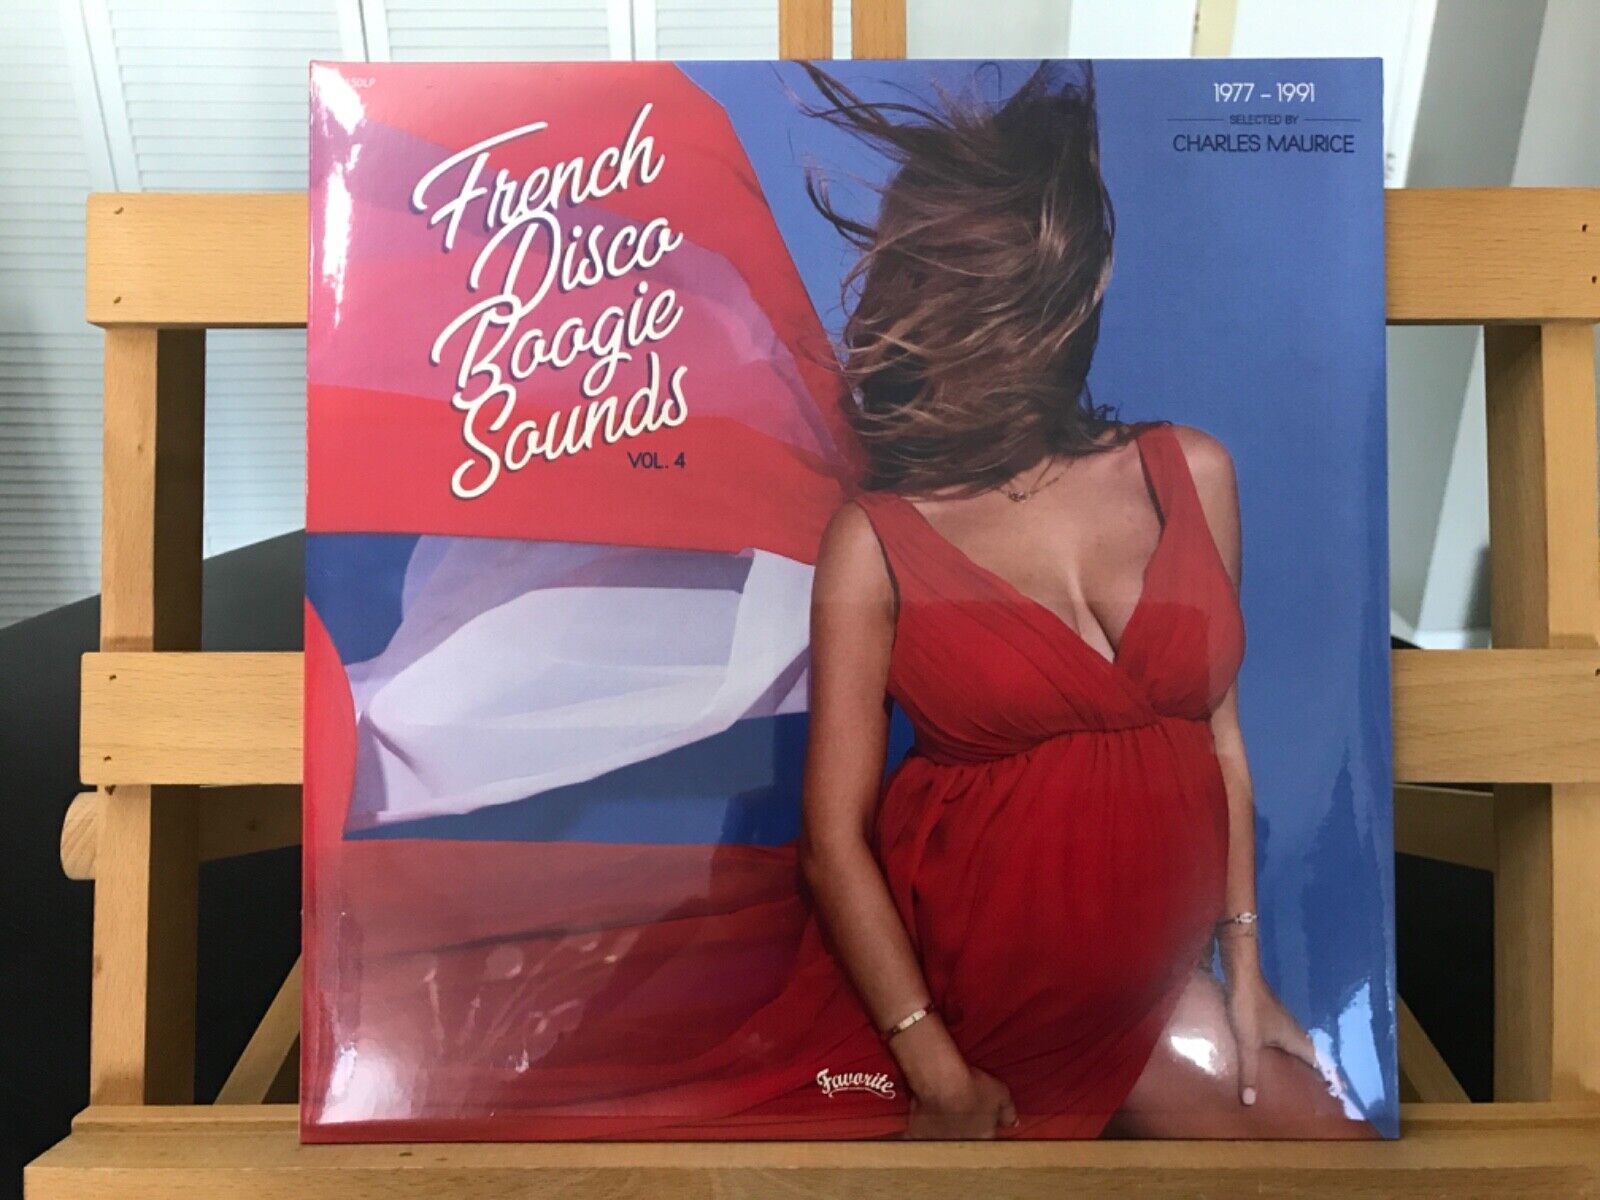 VARIOUS FRENCH DISCO BOOGIE SOUNDS VOL.4 (1977-1991) FAVORITE RECORDINGS FVR150L